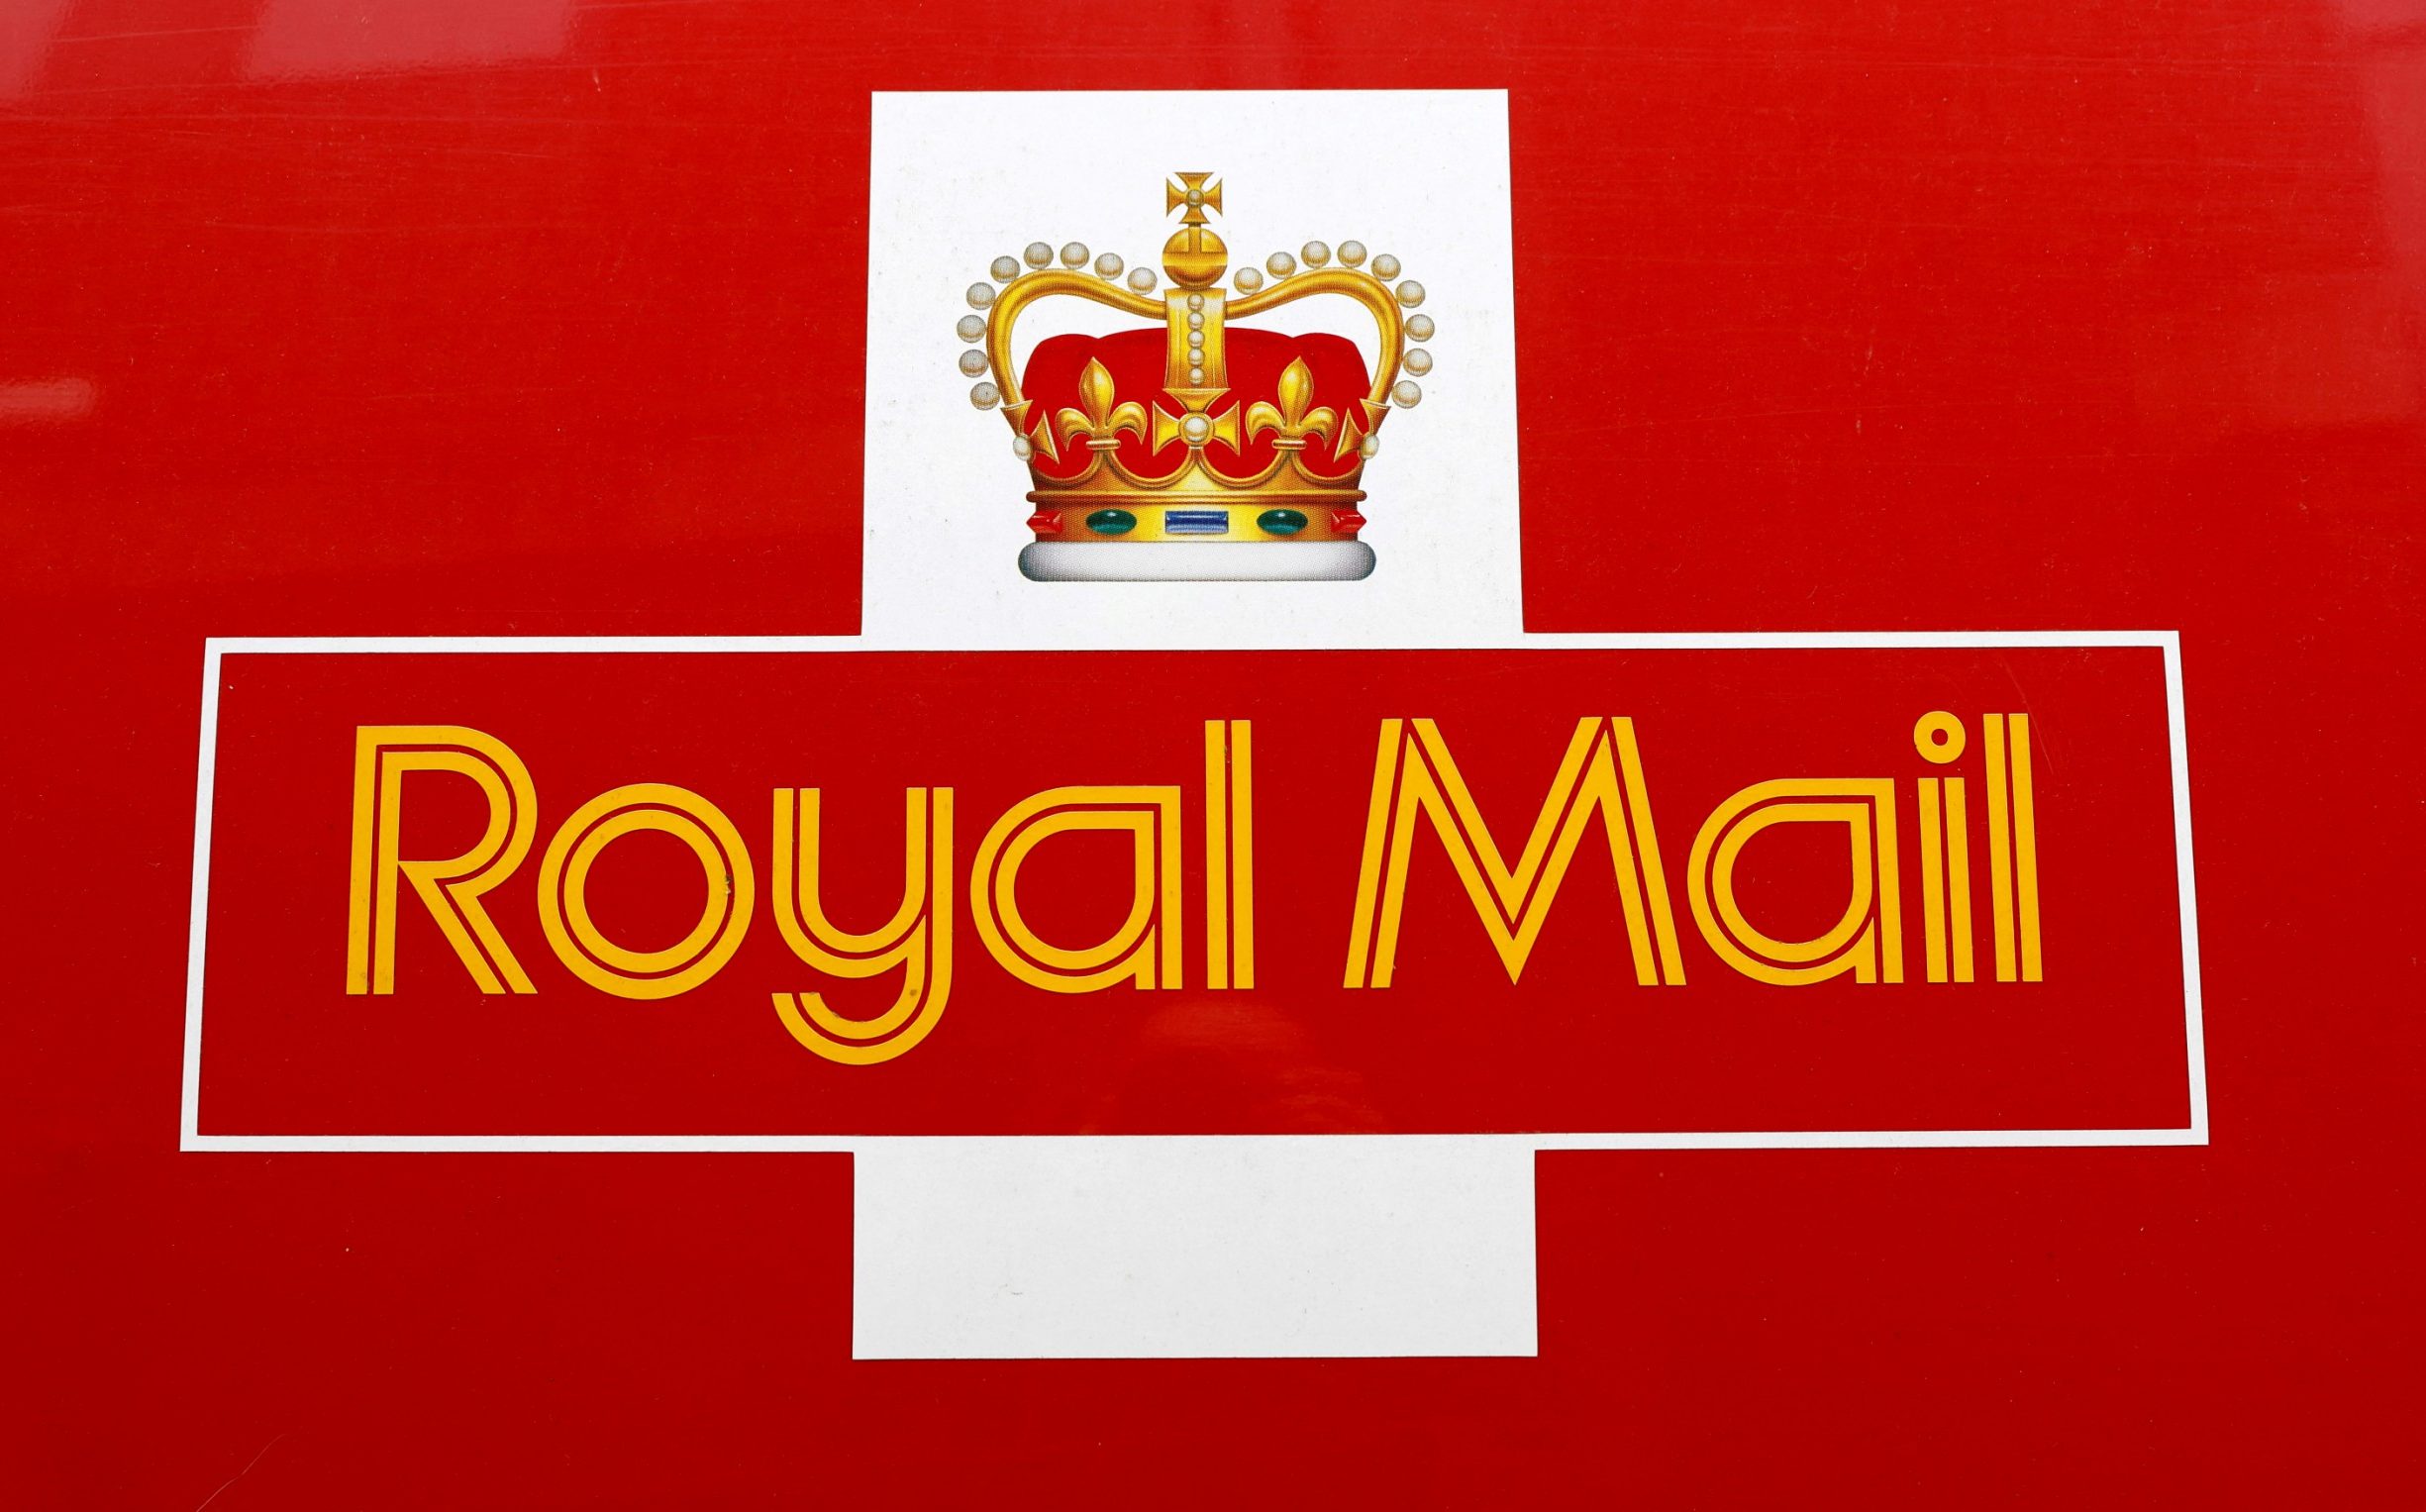 royal mail is a symbol of british failure, where the inept are rewarded and the innocent pay